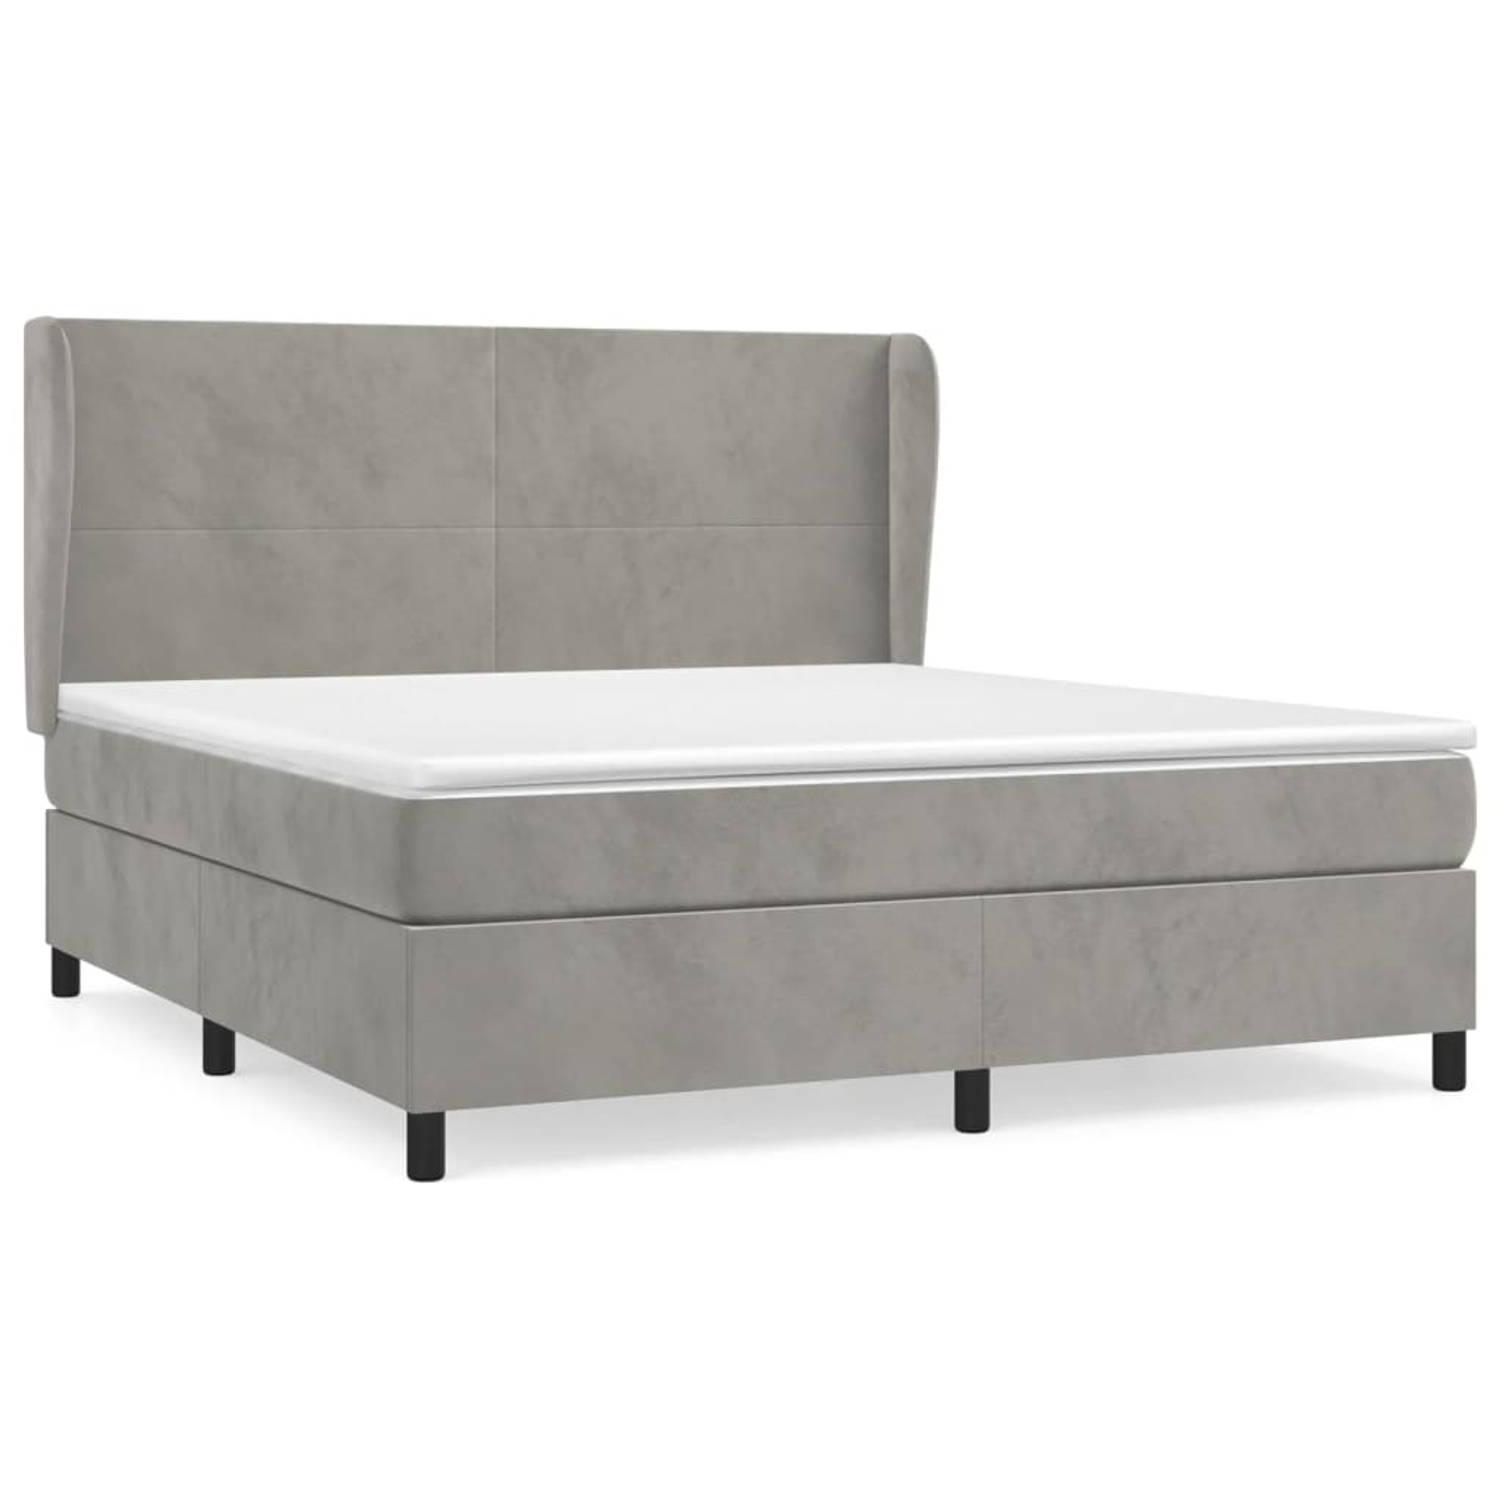 The Living Store Boxspringbed - The Living Store - Bedden - 160 x 200 - Lichtgrijs - Fluweel